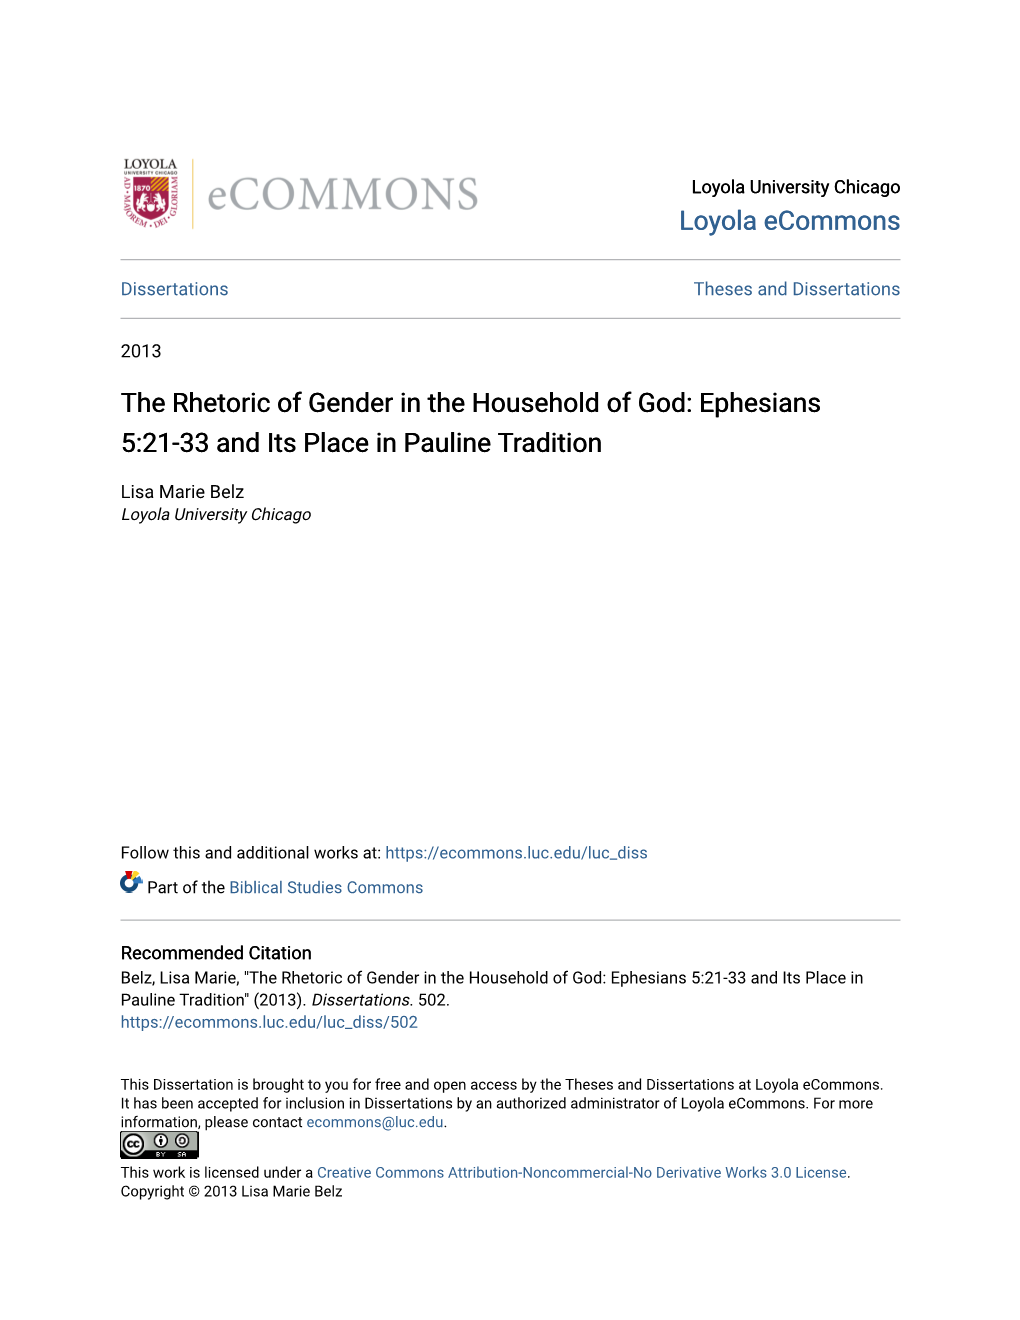 The Rhetoric of Gender in the Household of God: Ephesians 5:21-33 and Its Place in Pauline Tradition